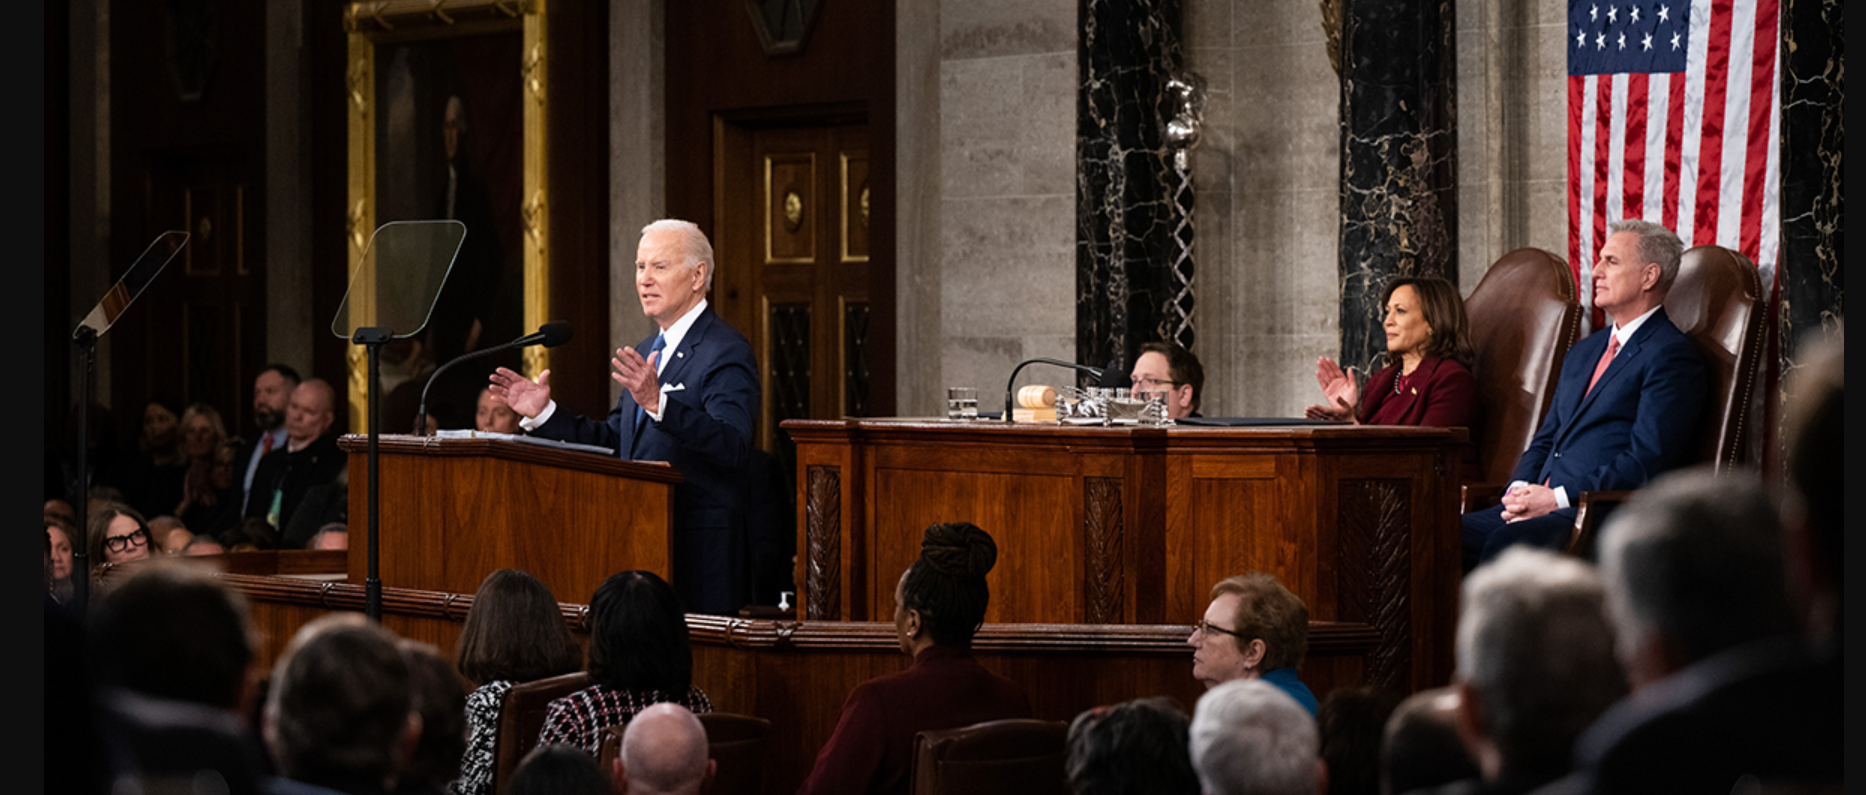 Biden delivering his 2023 state of the union address to a joint session of Congress